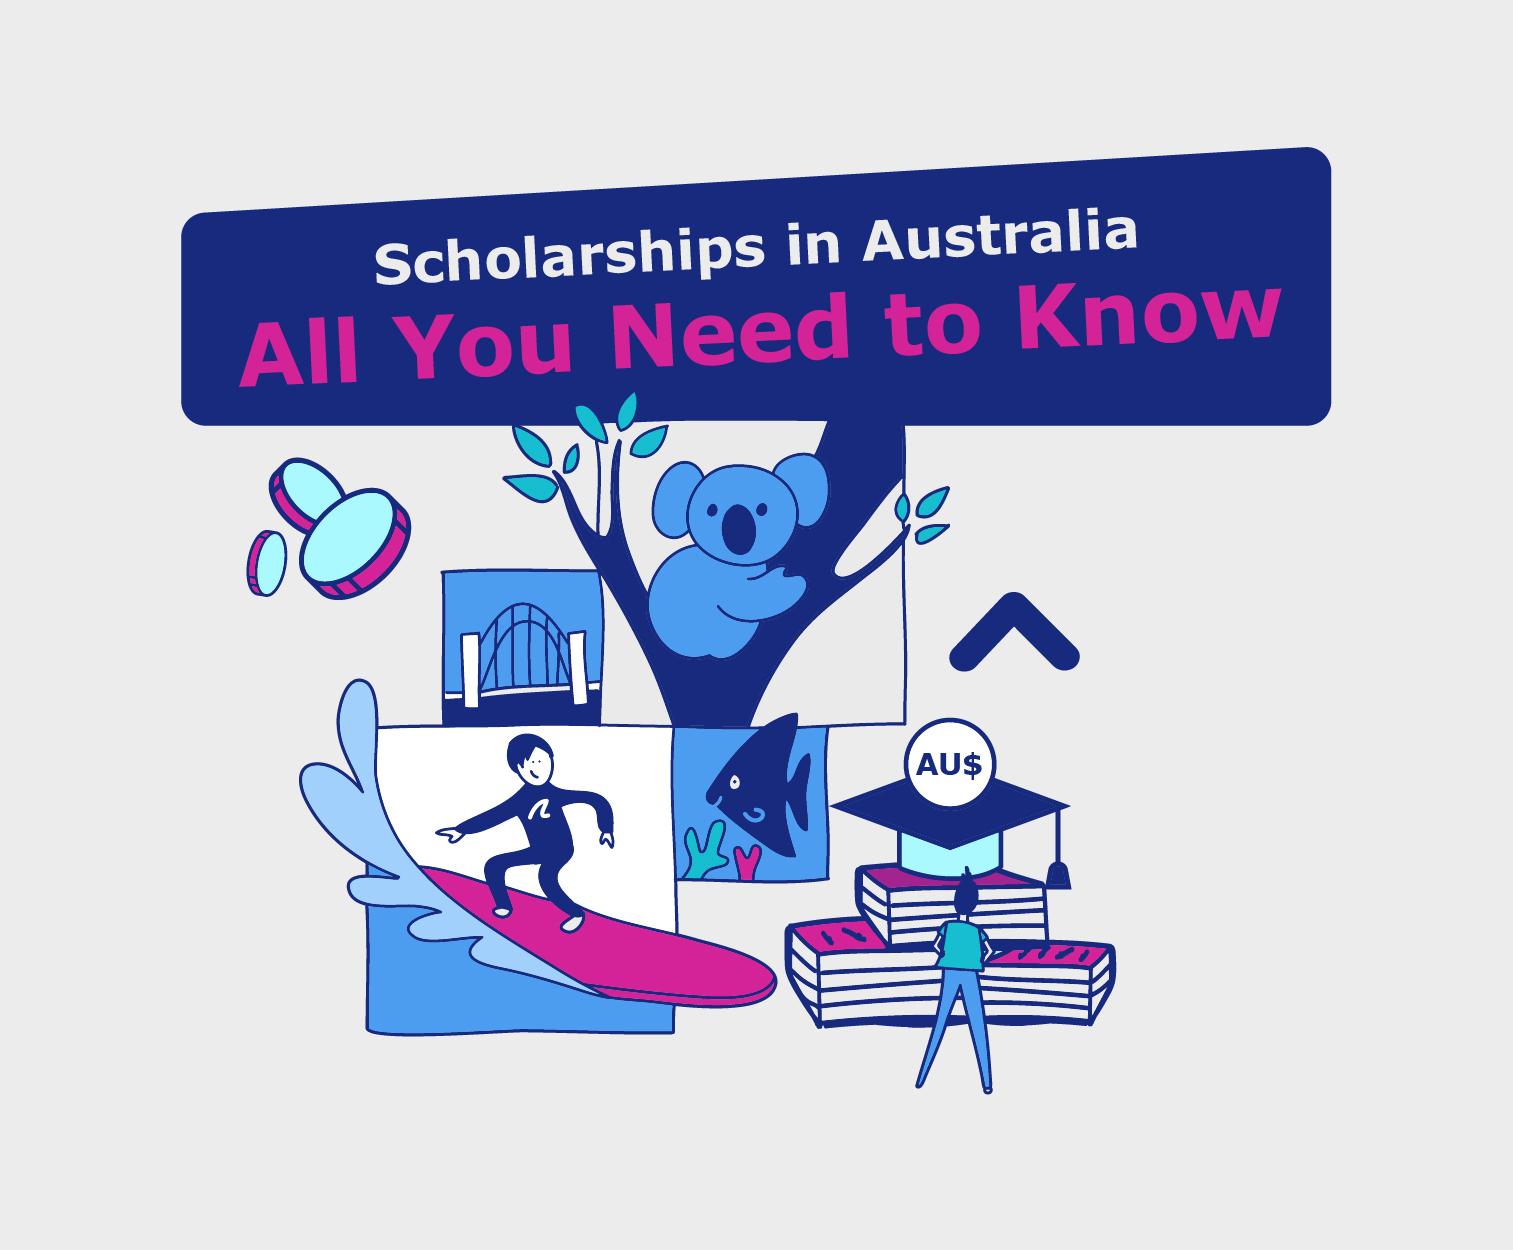 Scholarships in Australia: All You Need to Know